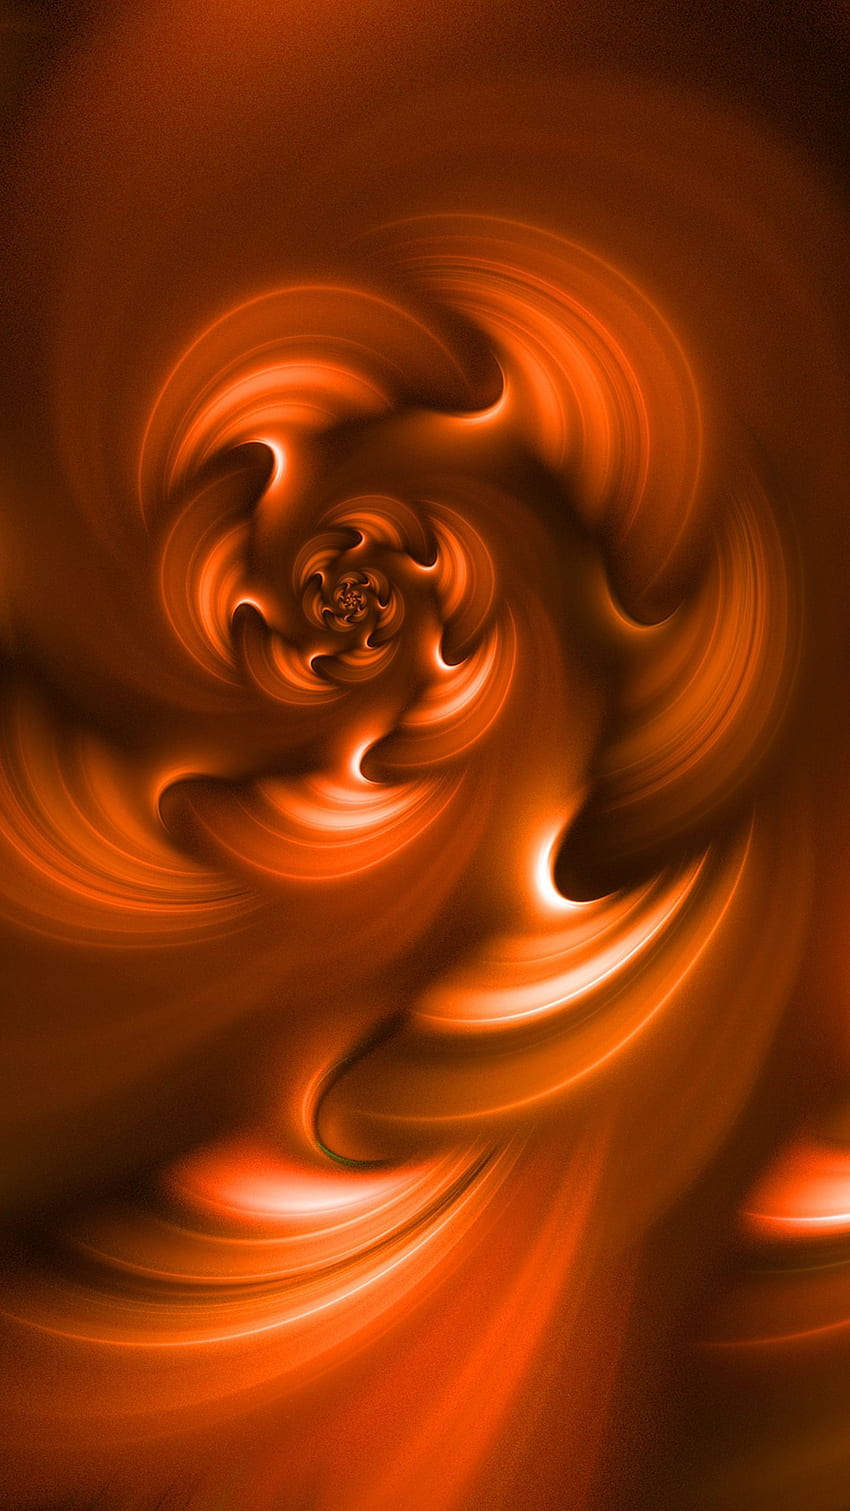 Abstract, Fractal, Glow, Spiral, Flaming, Involute, Swirling, Fiery HD phone wallpaper